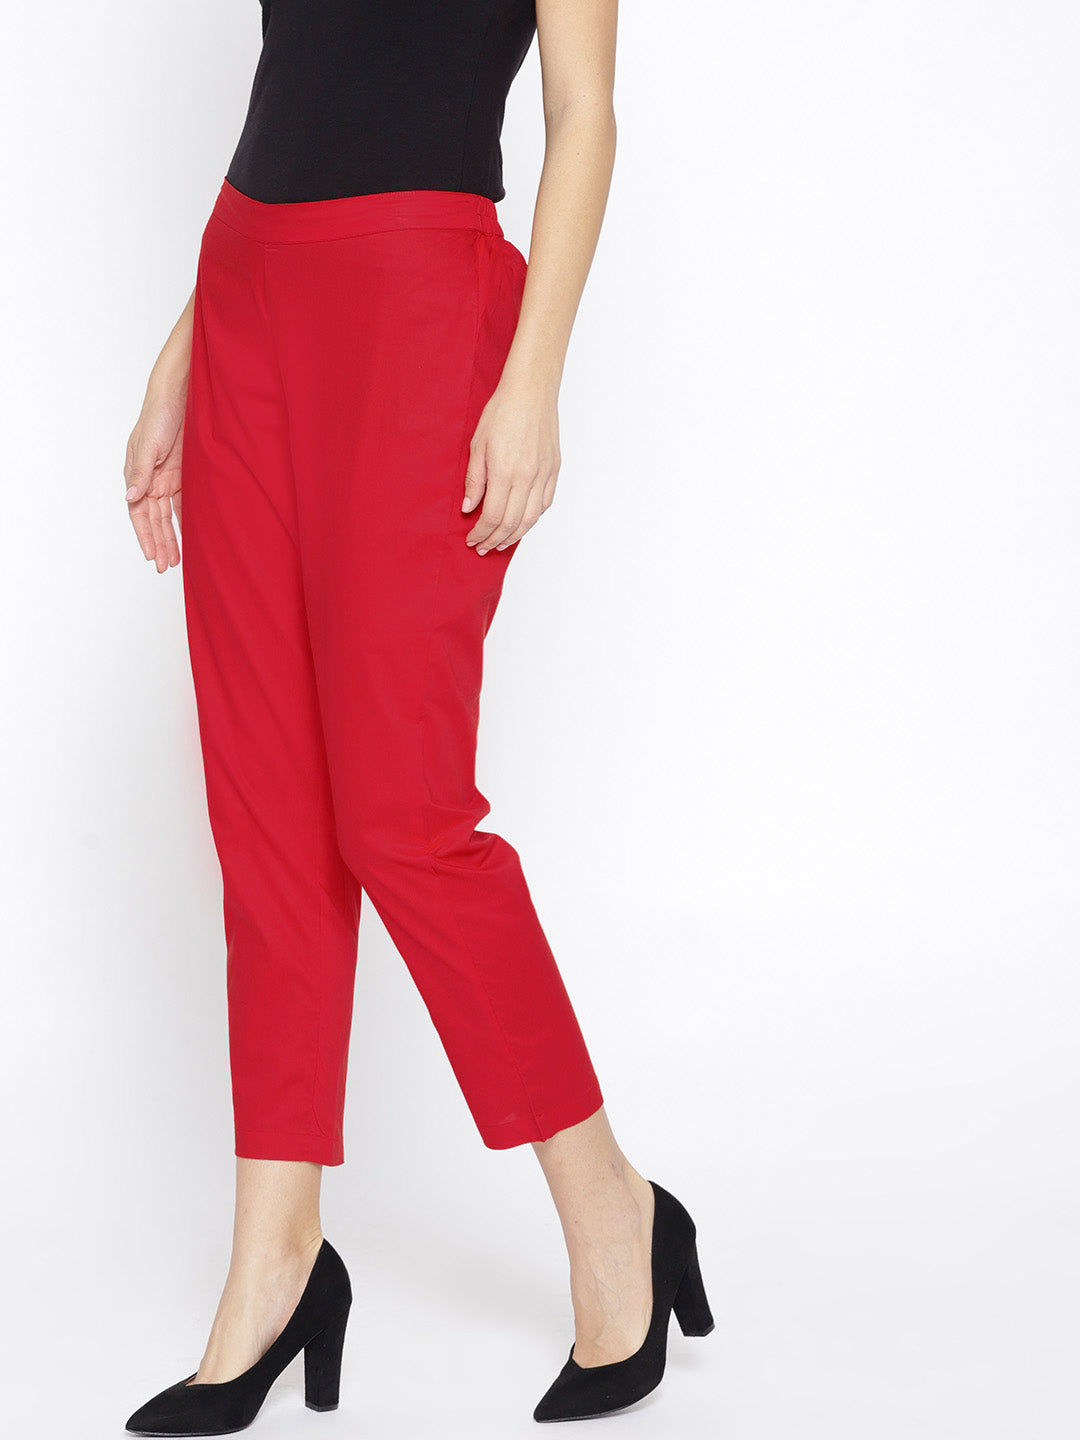 Pair Black Ankle Pants with Black Ankle Straps - YLF